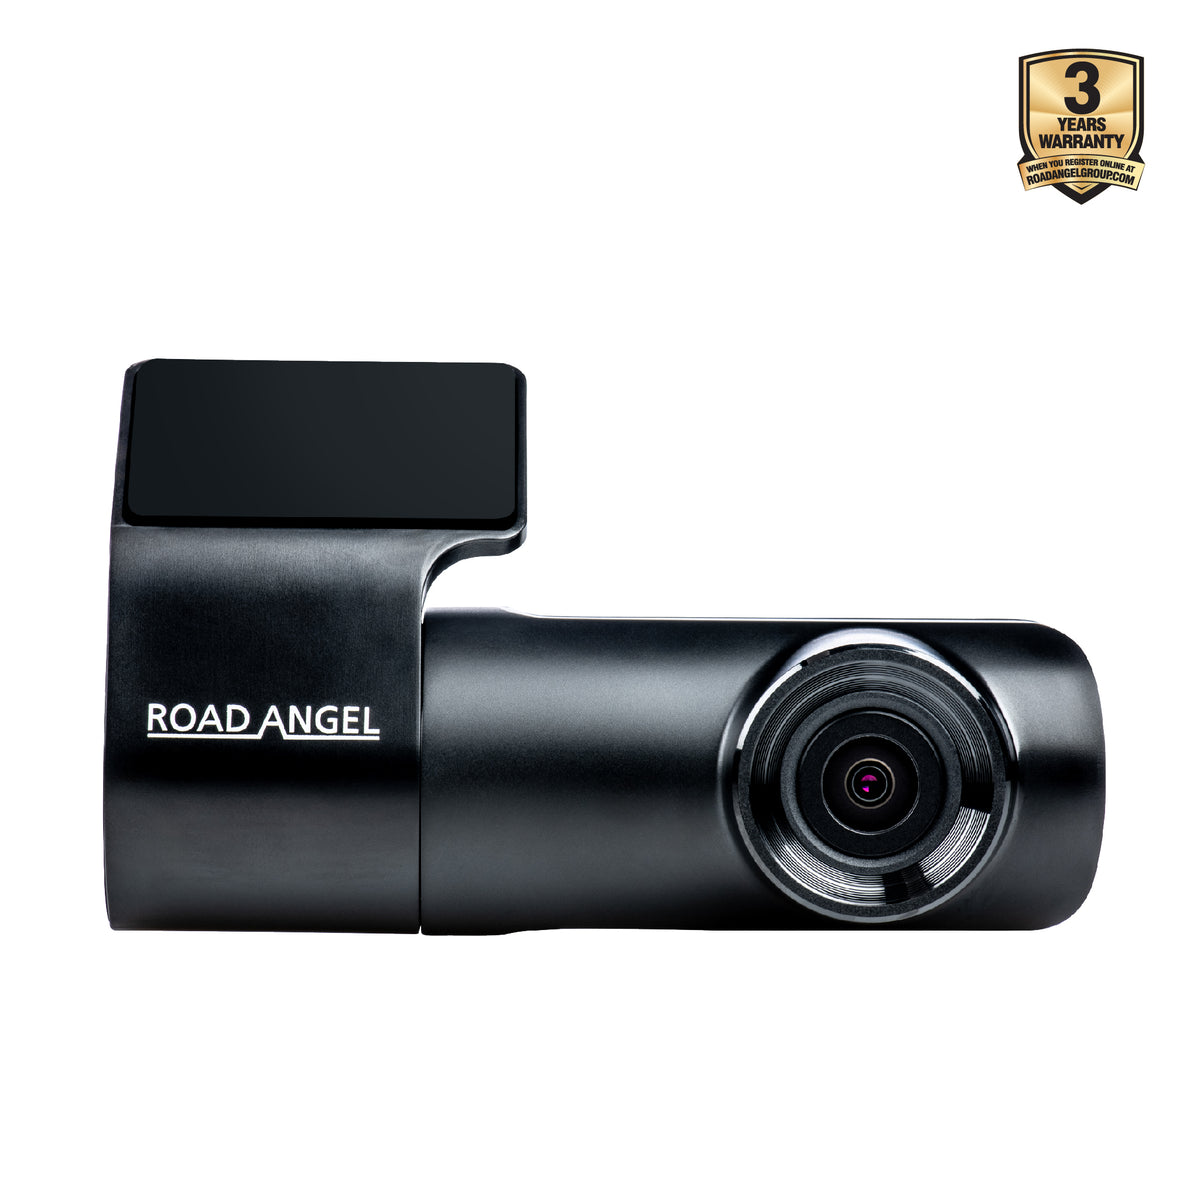 NEW - Road Angel Halo Start 1080p Full HD Compact Dash Cam With Quick Release Mount